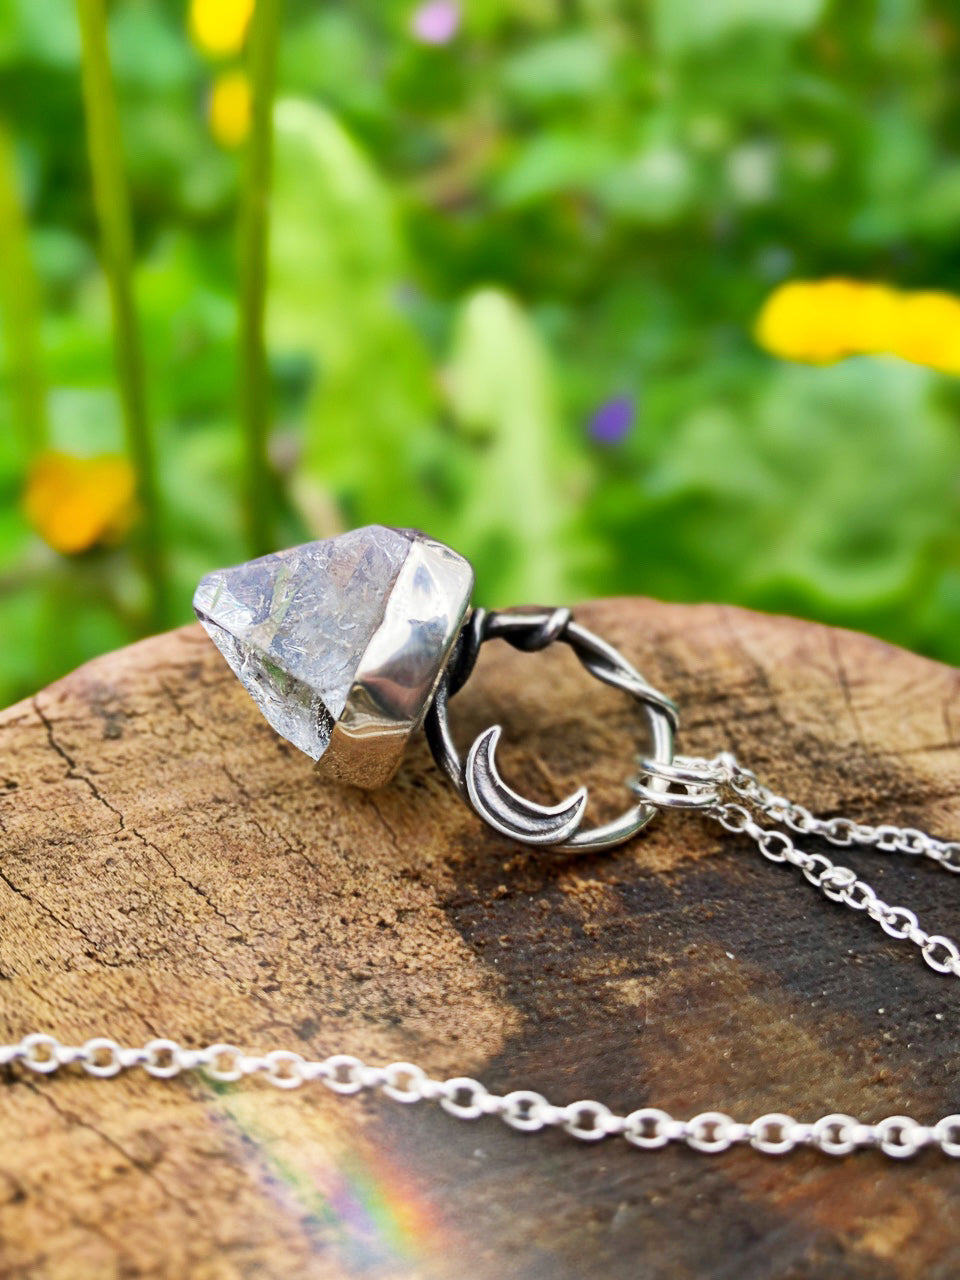 ꩜ LIGHTKEEPER ꩜ Handmade Sterling Silver Necklace with Apophyllite